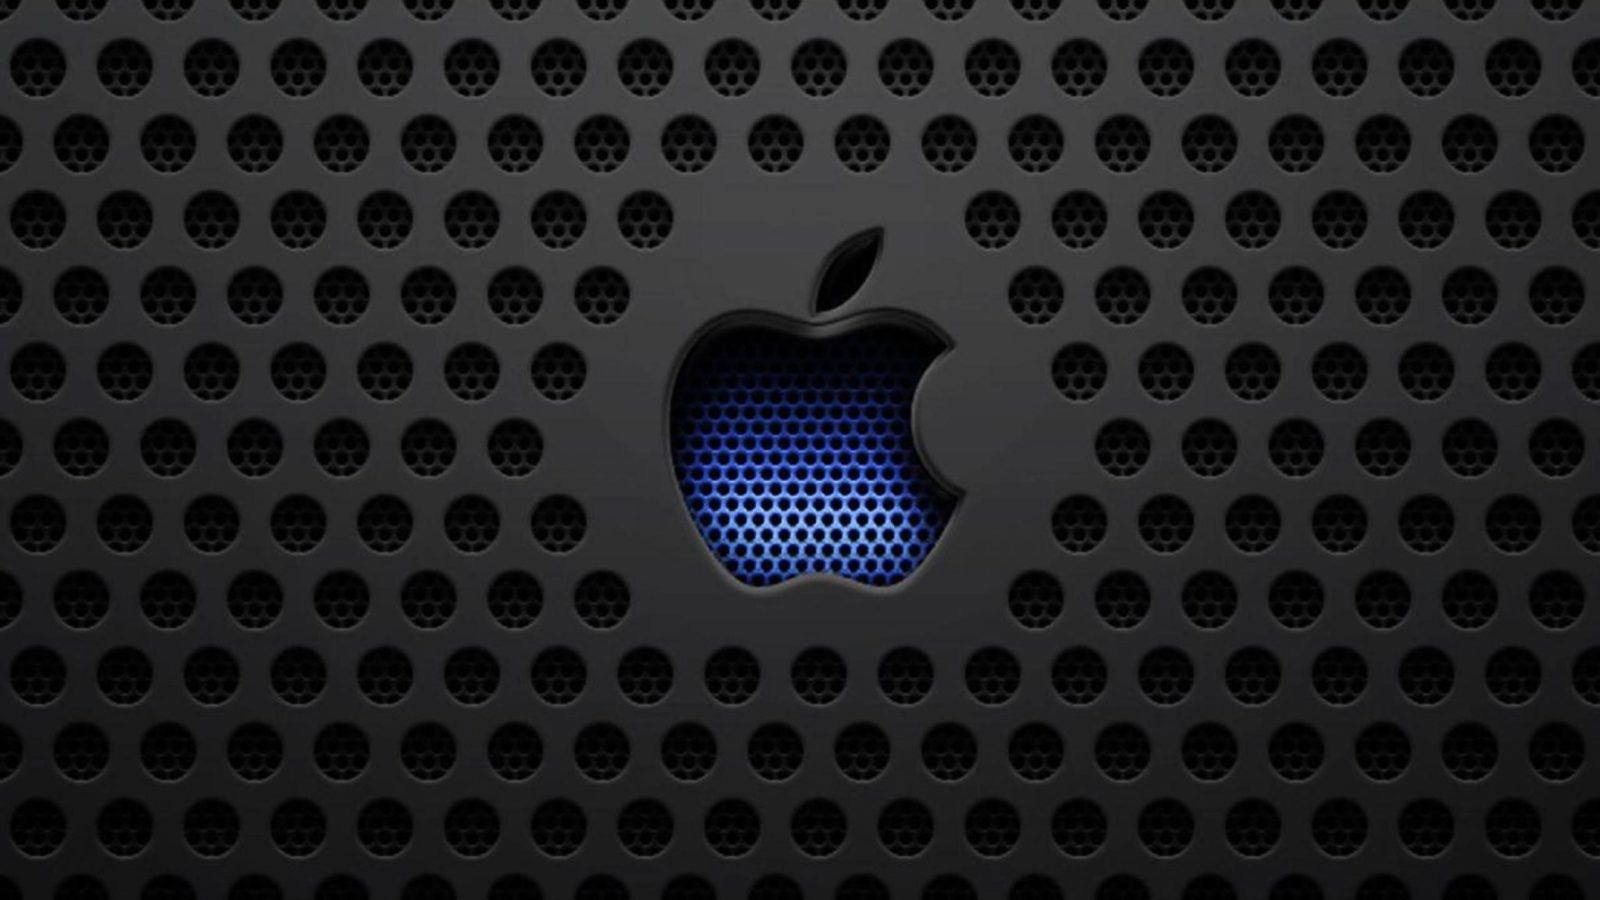 Apple Logo 3d All Resoluations Wallpaper Free Download – HD Wallpapers Backgrounds Desktop, iphone & Android Free Download